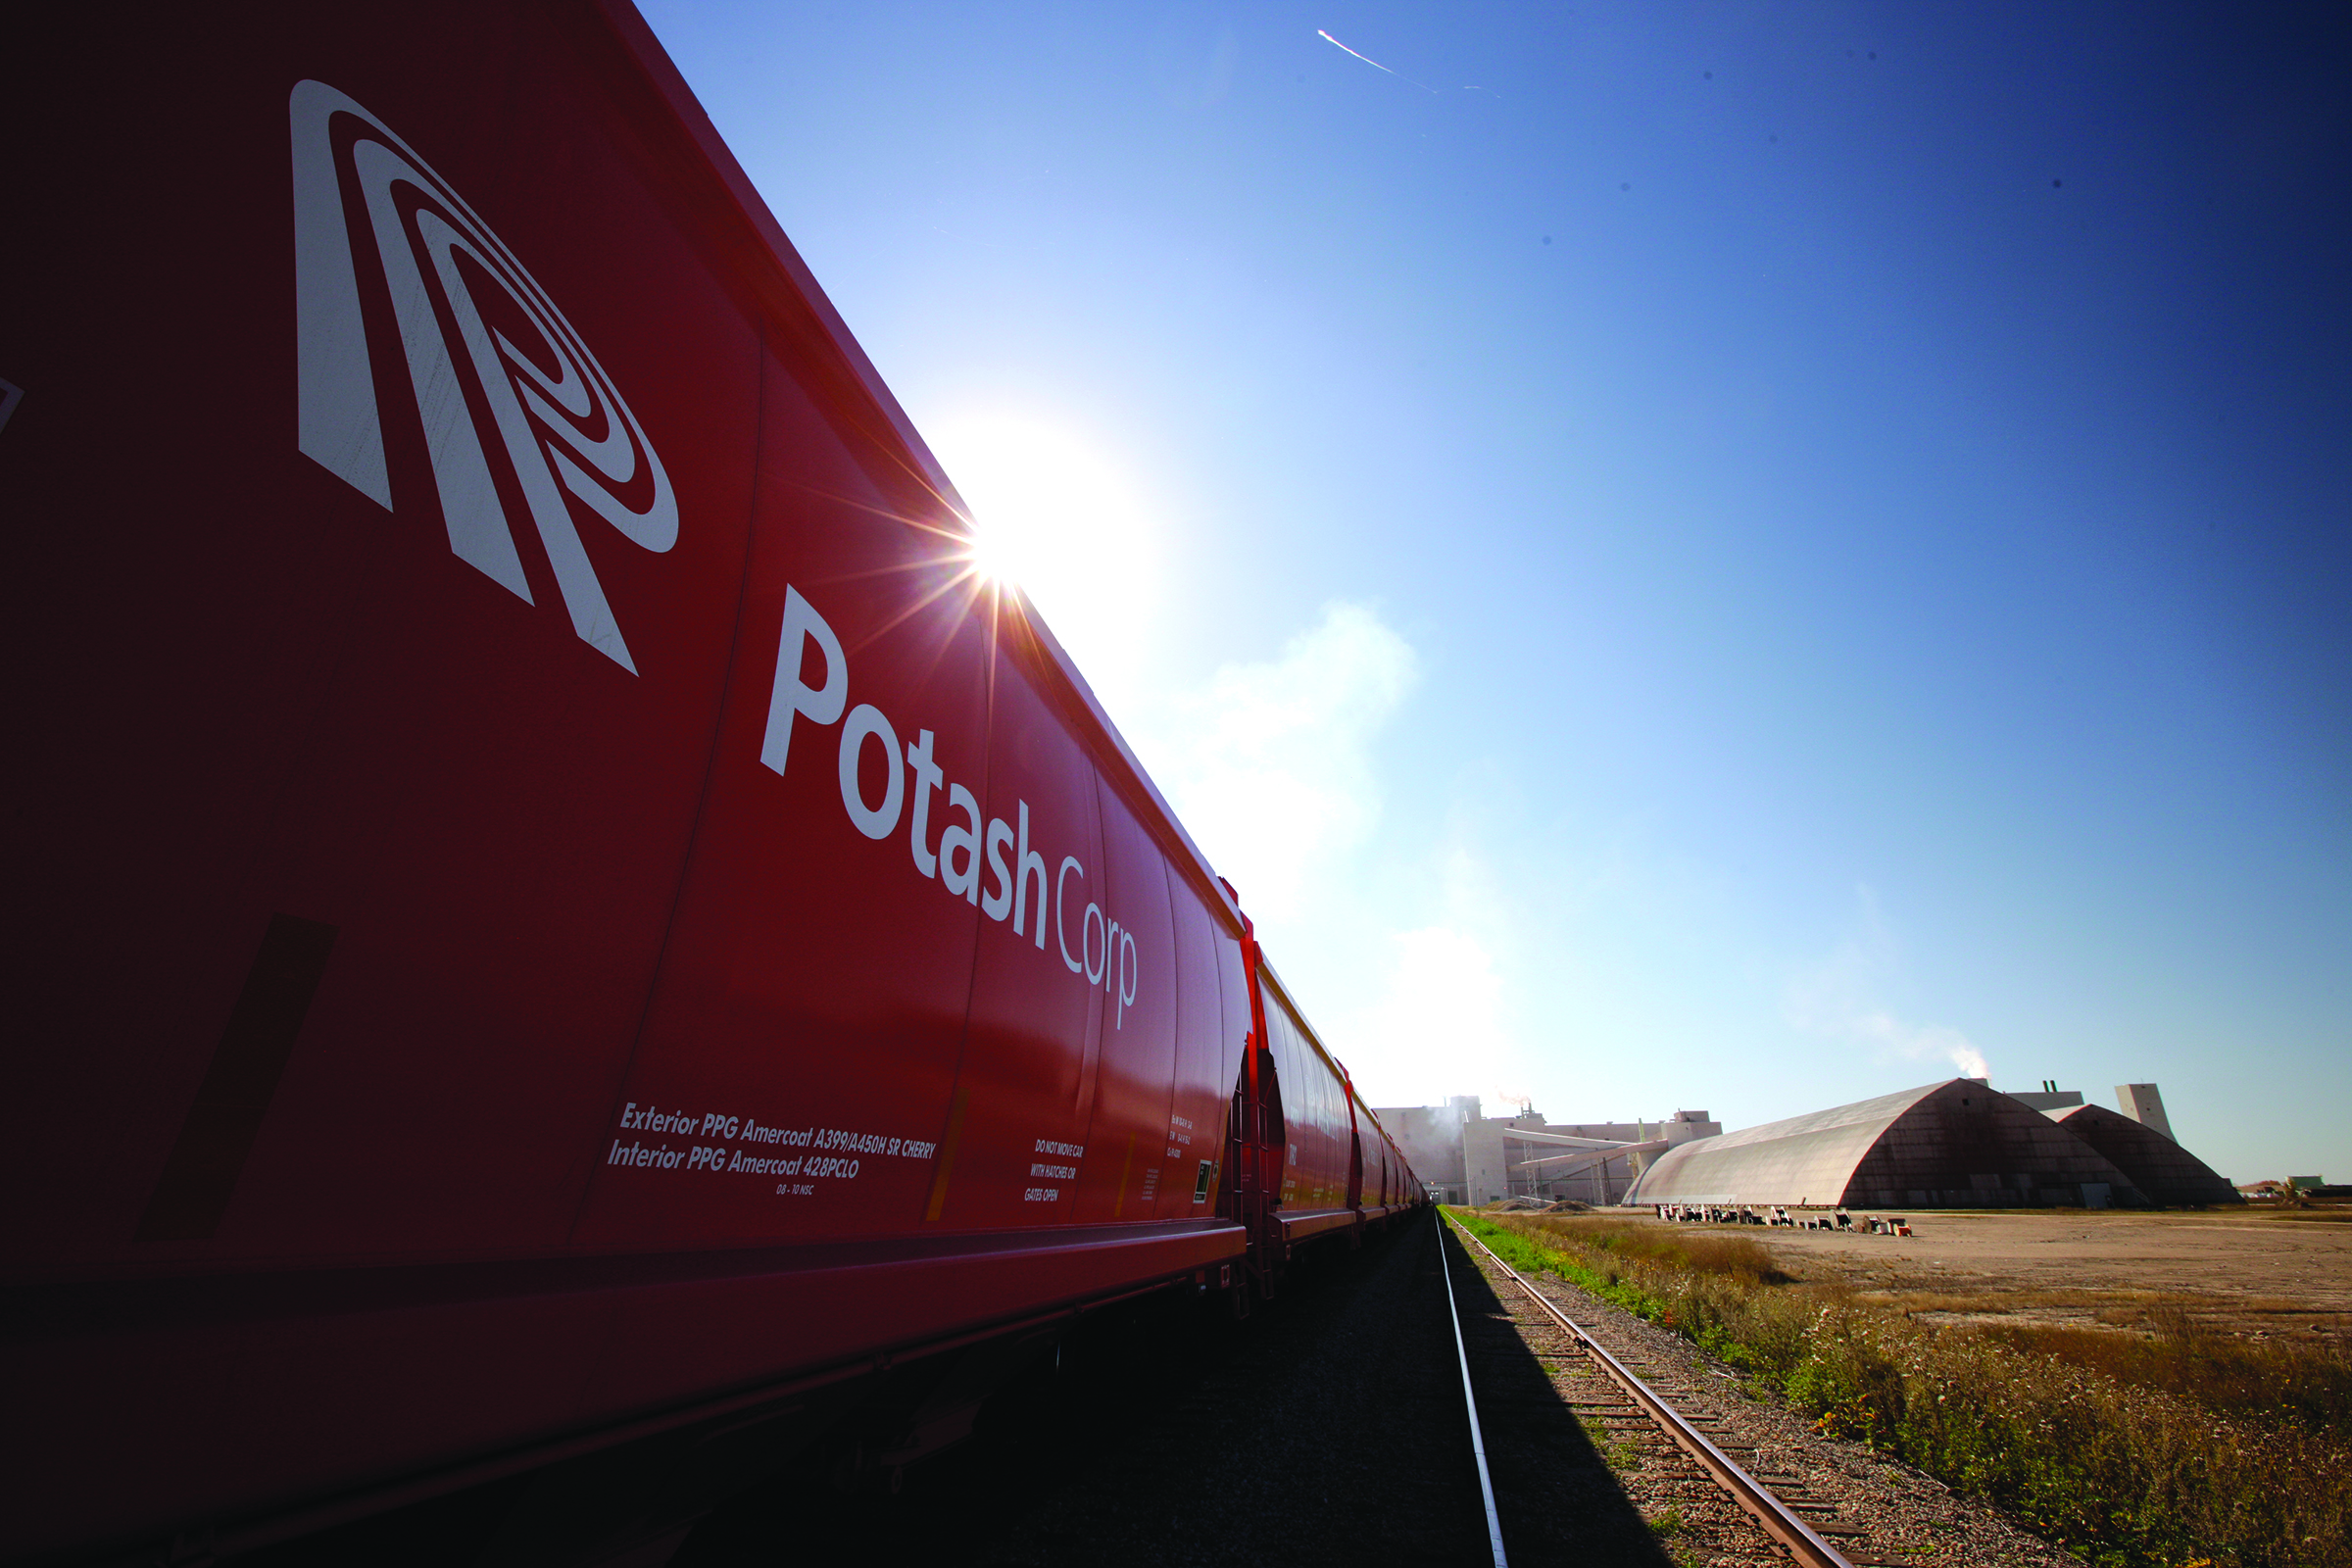  Saskatchewan-based PotashCorp operates six potash mines, accounting for about 20% of world potash capacity. Agrium operates one mine and has a retail distribution network encompassing more than 1,400 facilities worldwide. When combined, the new company will have about 20,000 employees (Photo: PotashCorp)